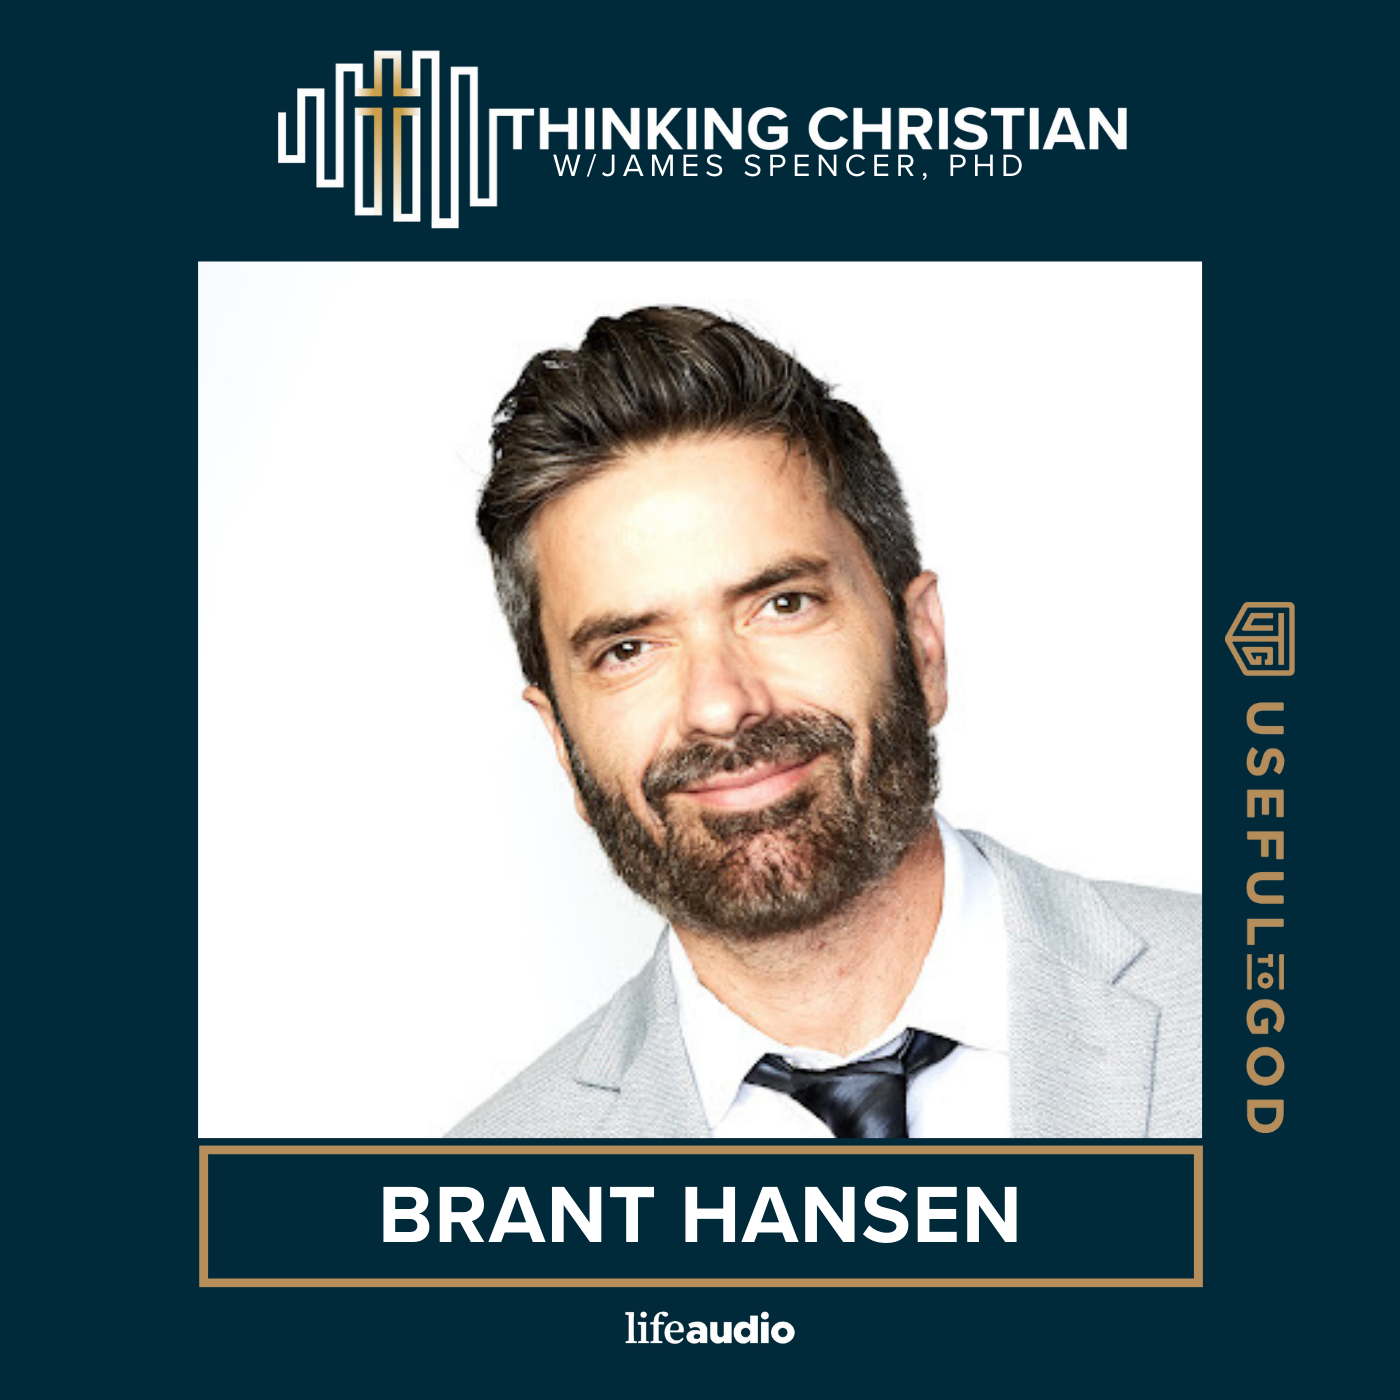 An Interview with Brant Hansen- How Should Christians Think about Health, Healing, and the Proclamation of the Gospel